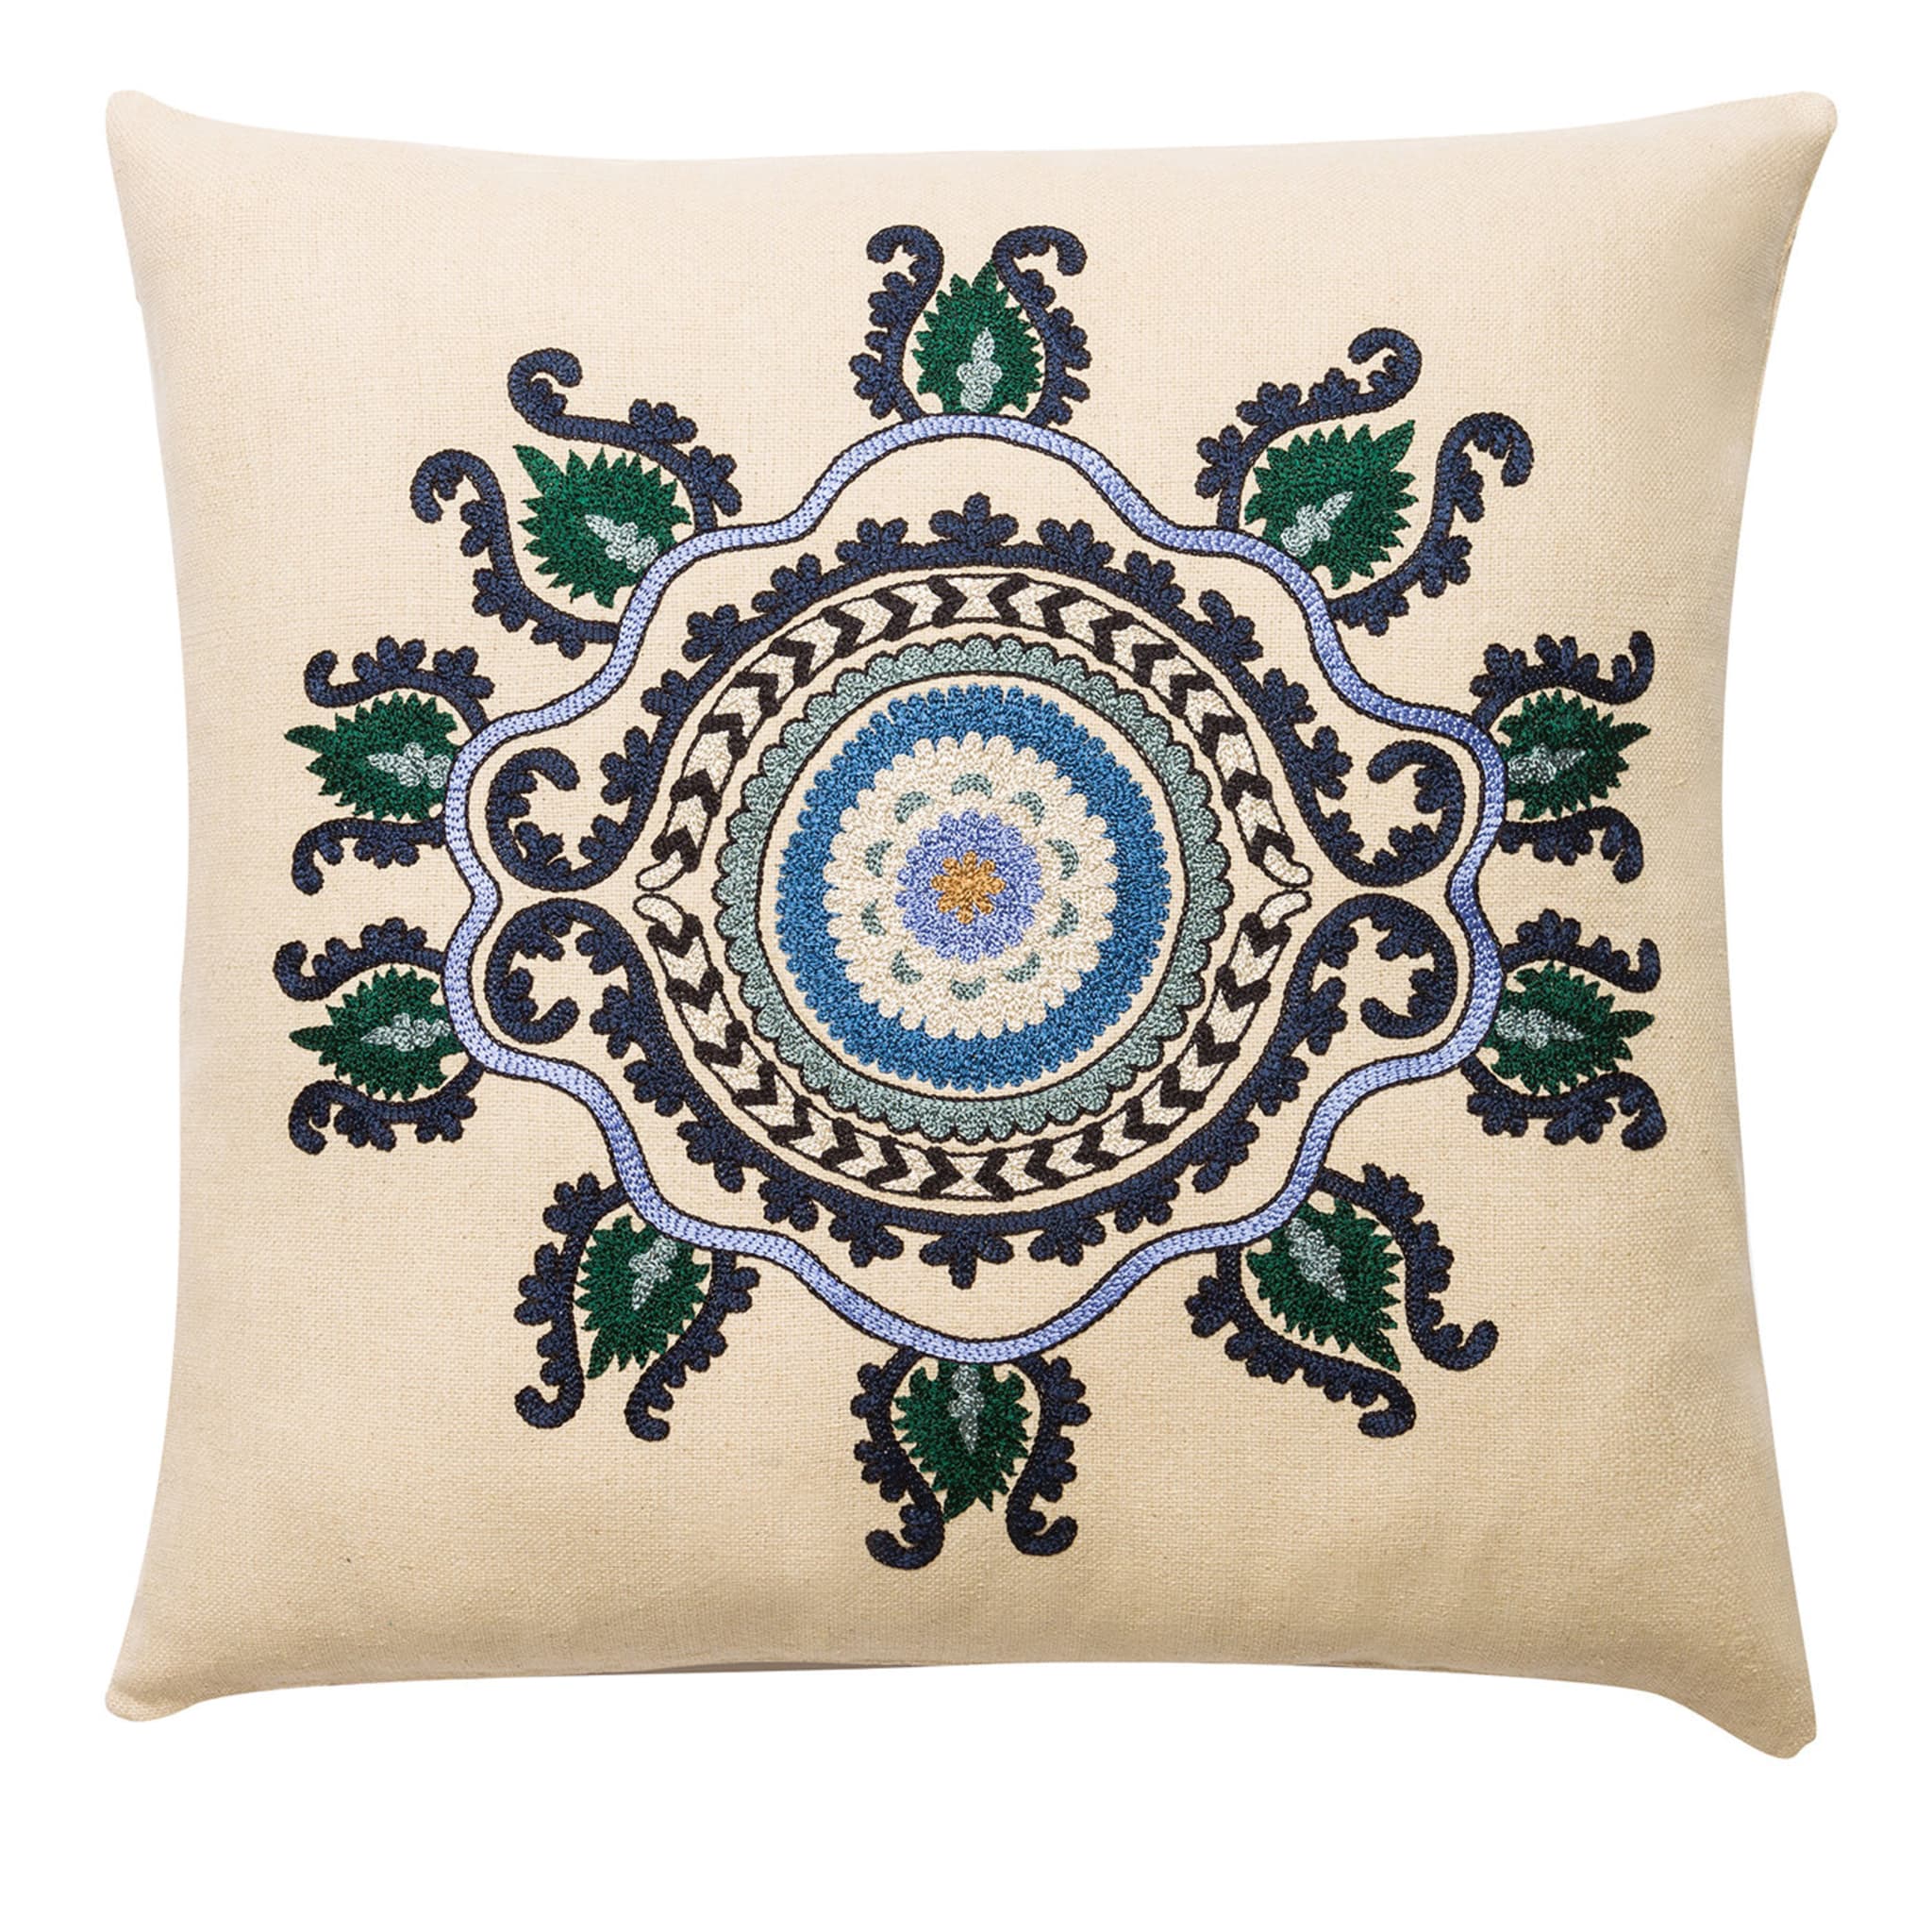 Poppy Flower Square Blue and Green Pillowcase - Main view